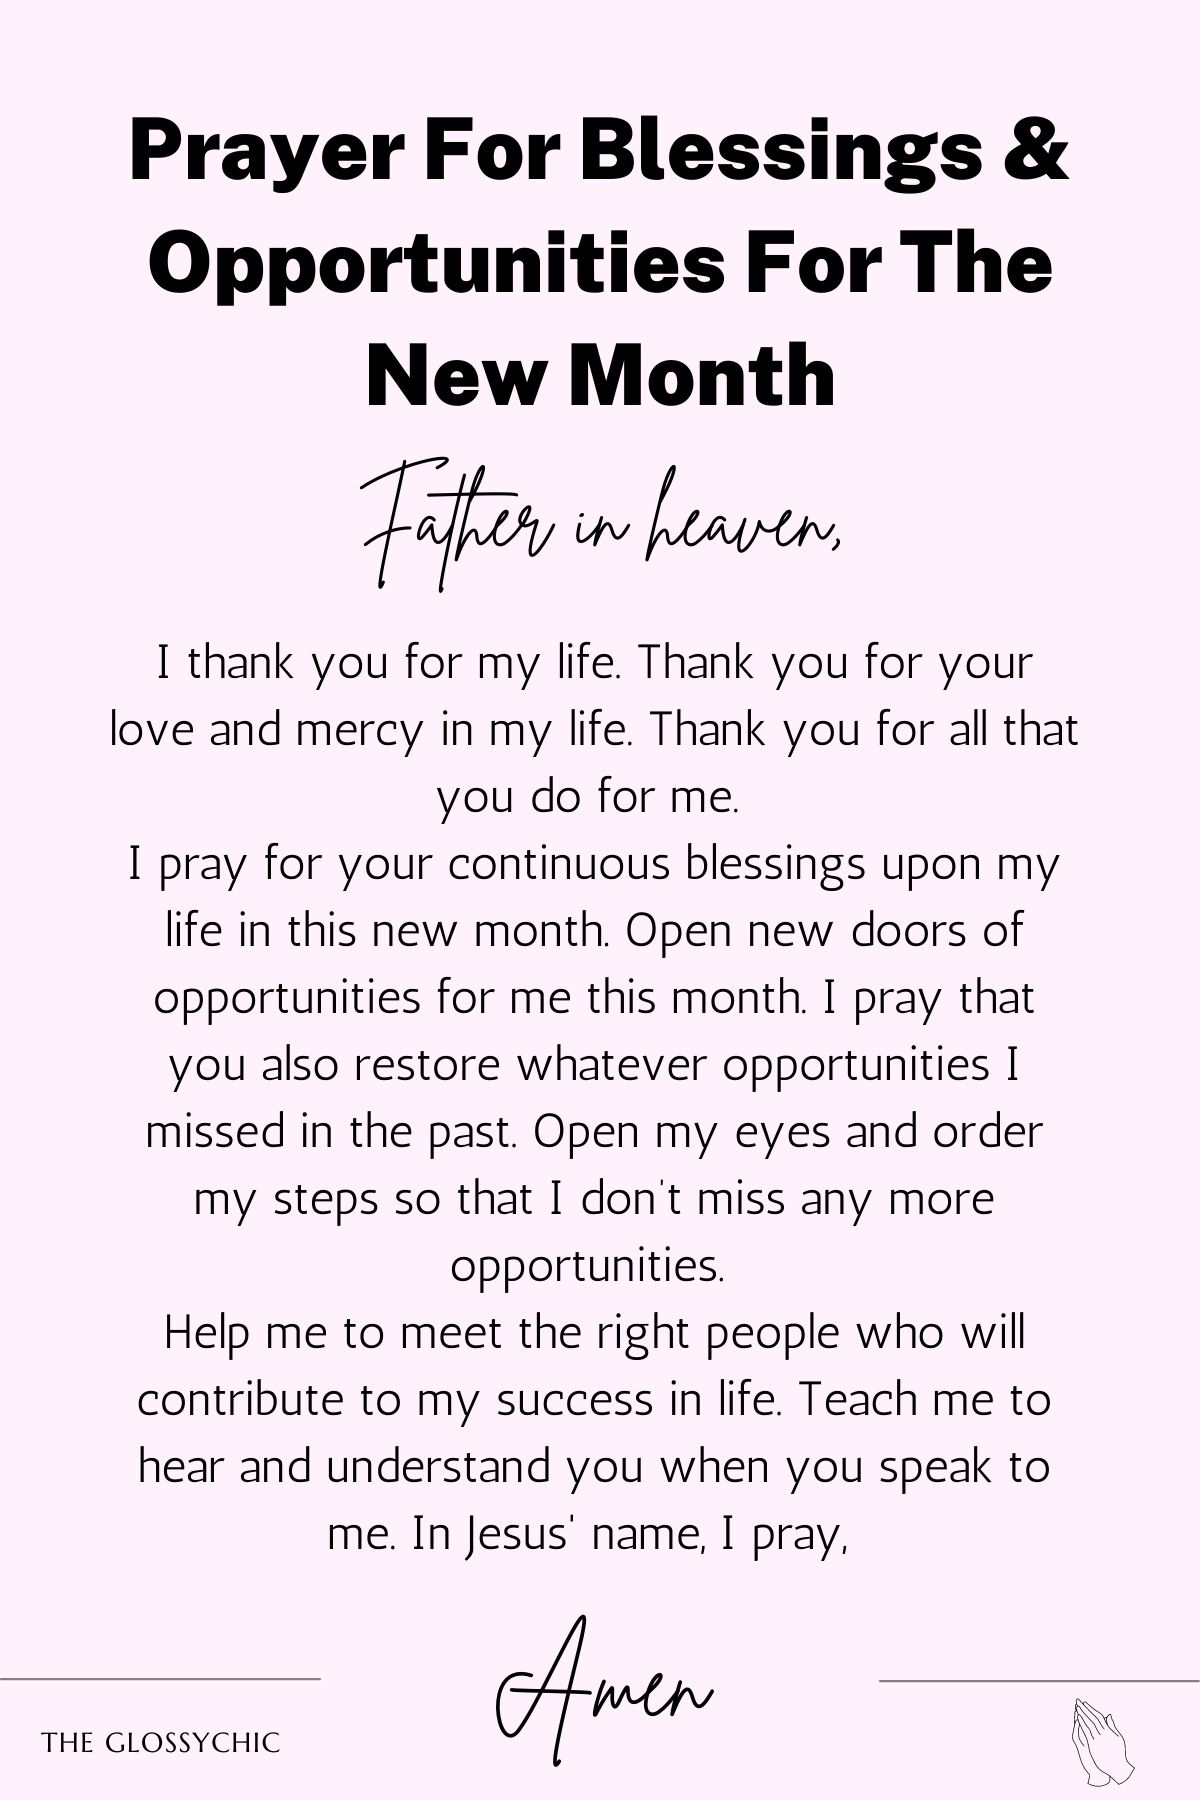 Prayer For Blessings & Opportunities For The New Month